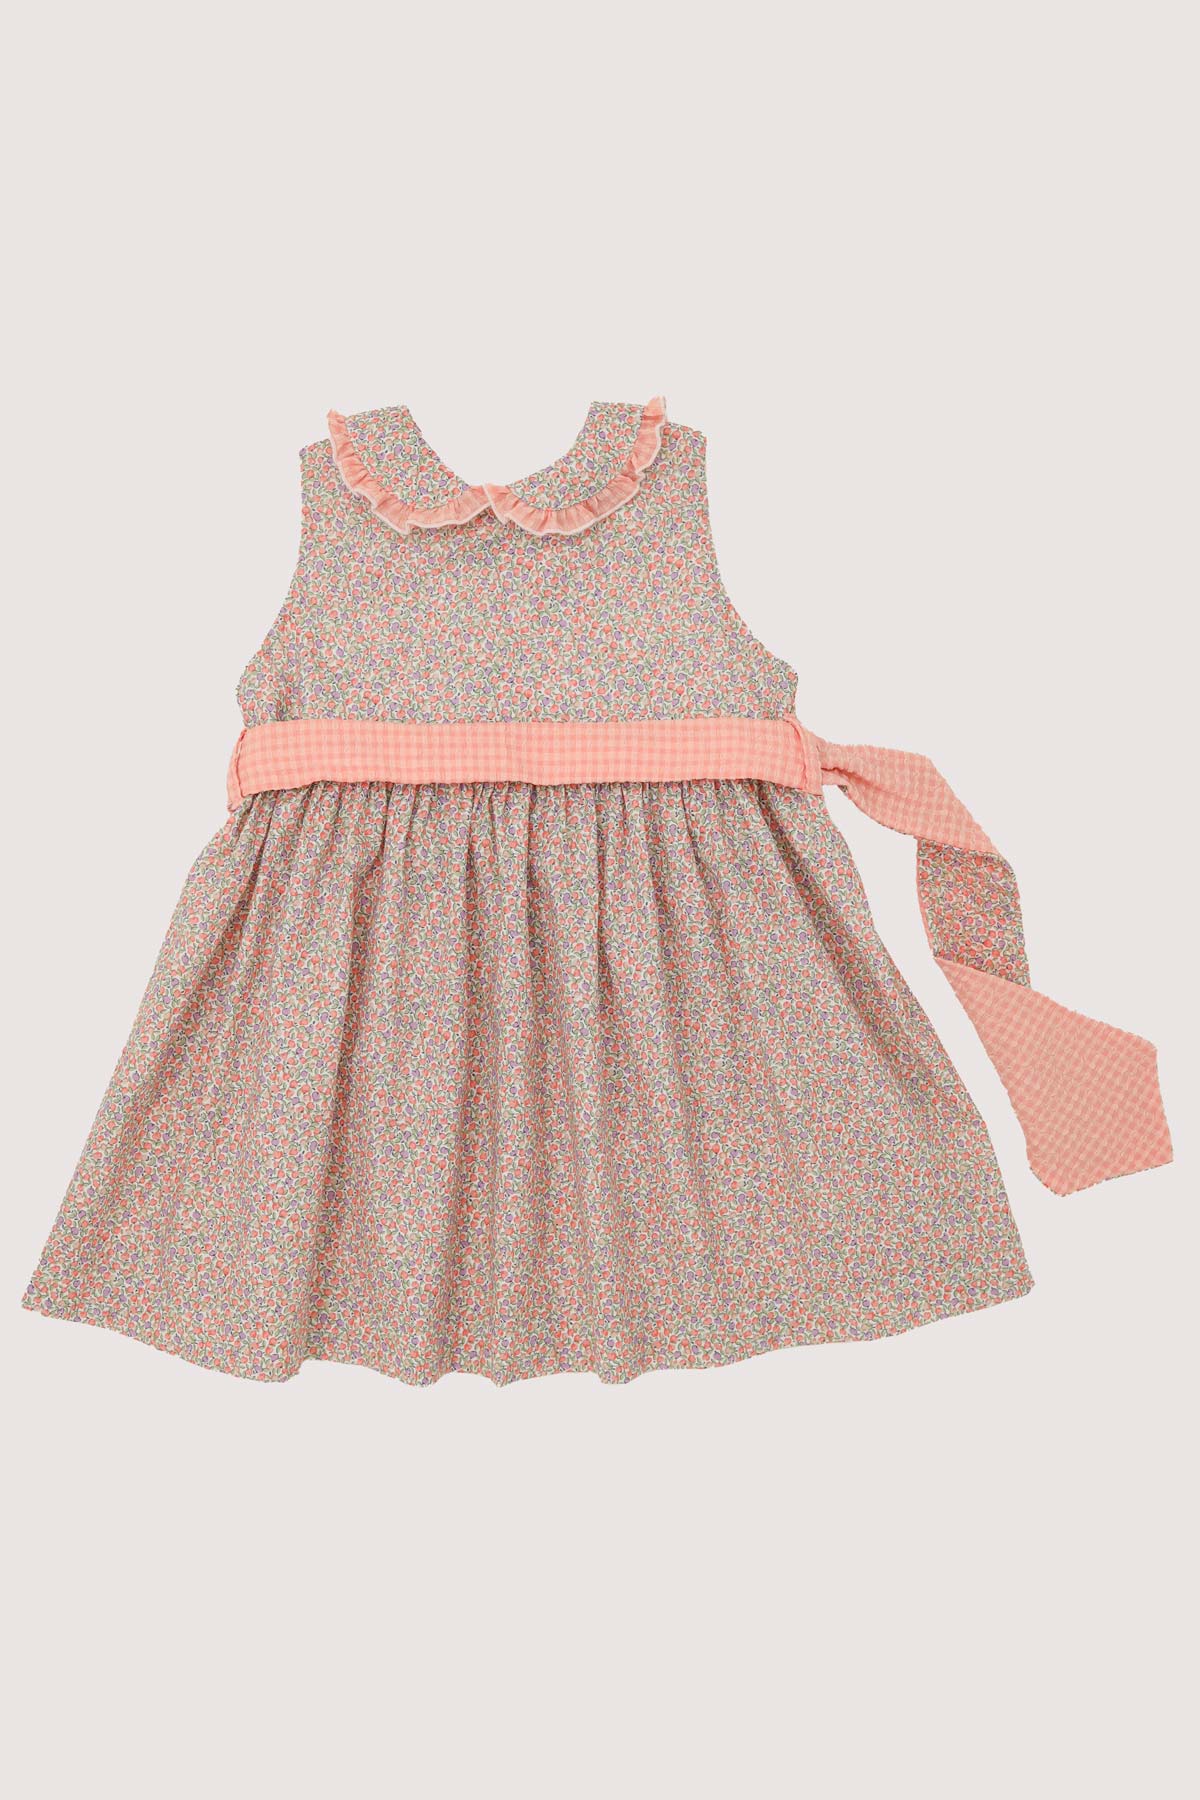 ditsy floral girls dress with peter pan collar